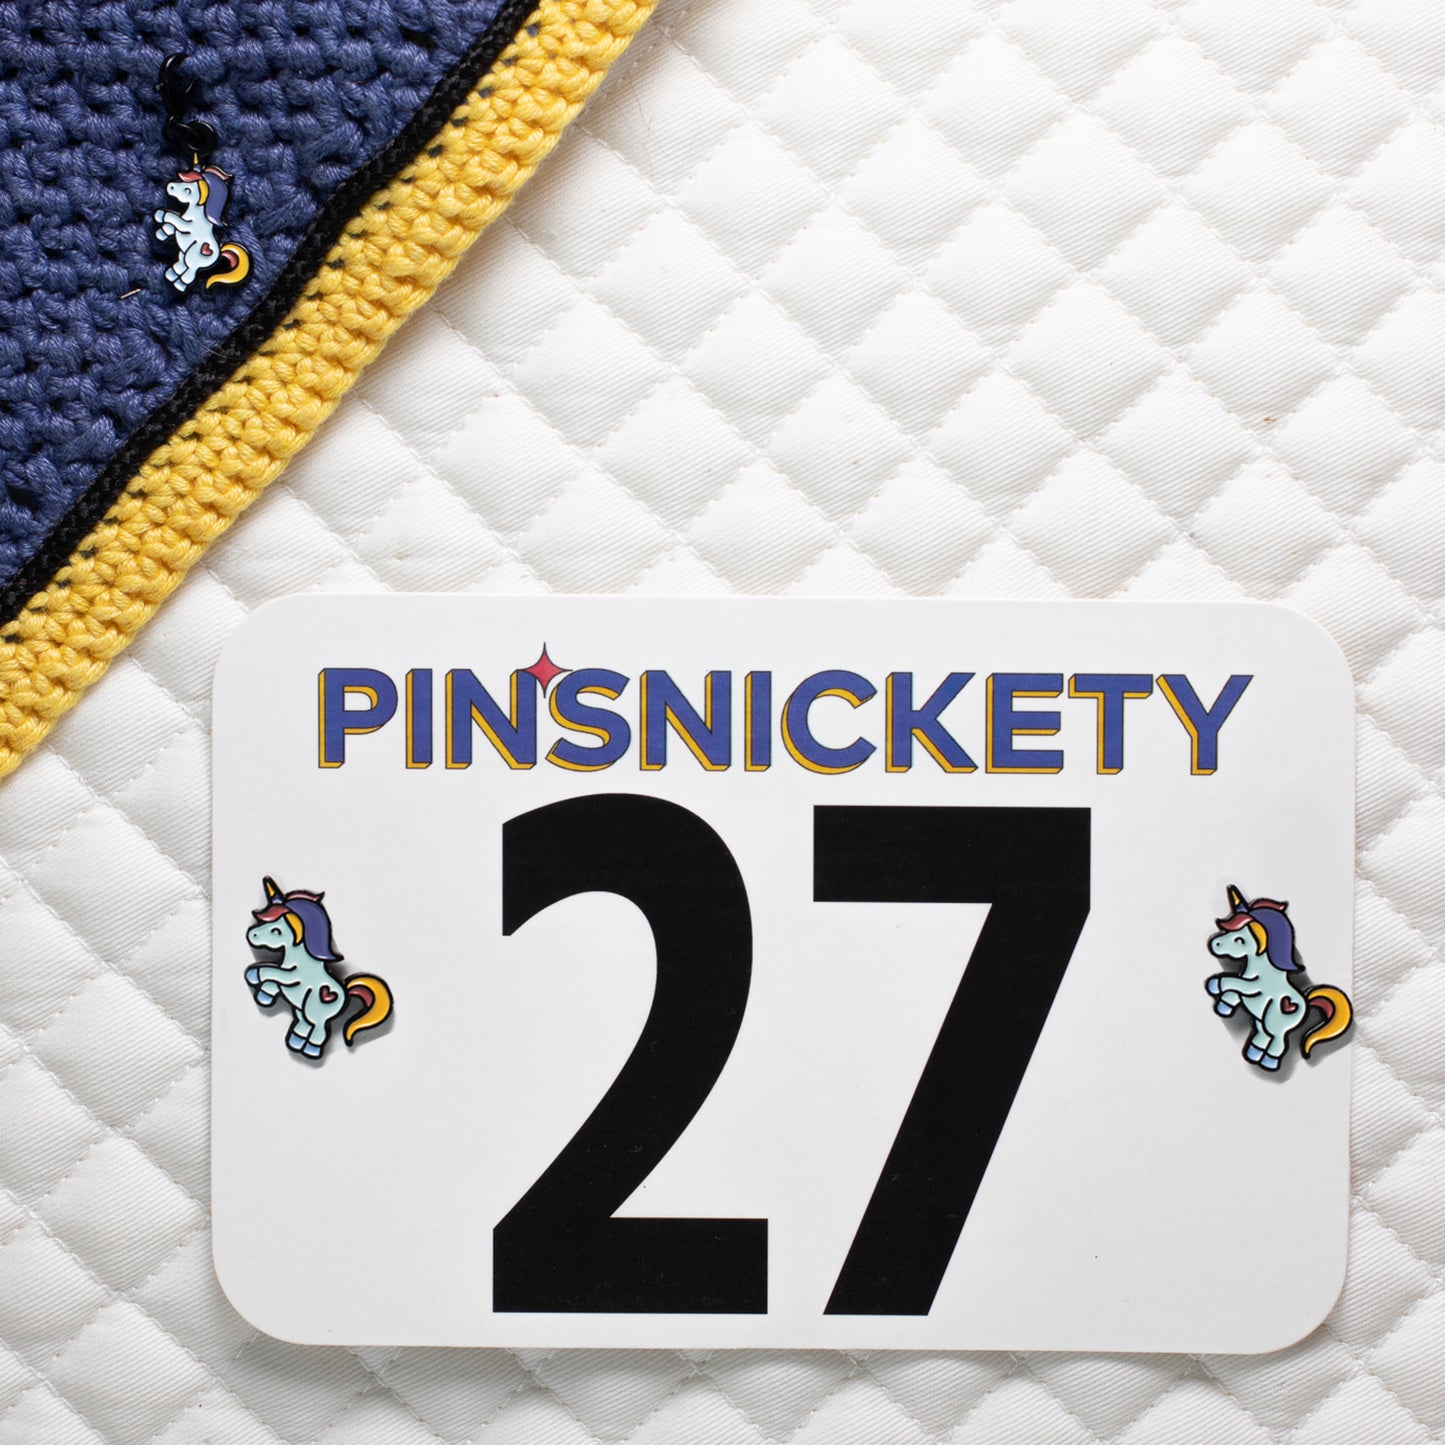 pinsnickety flying unicorn charm on a bonnet and horse show number pins on a saddle pad.